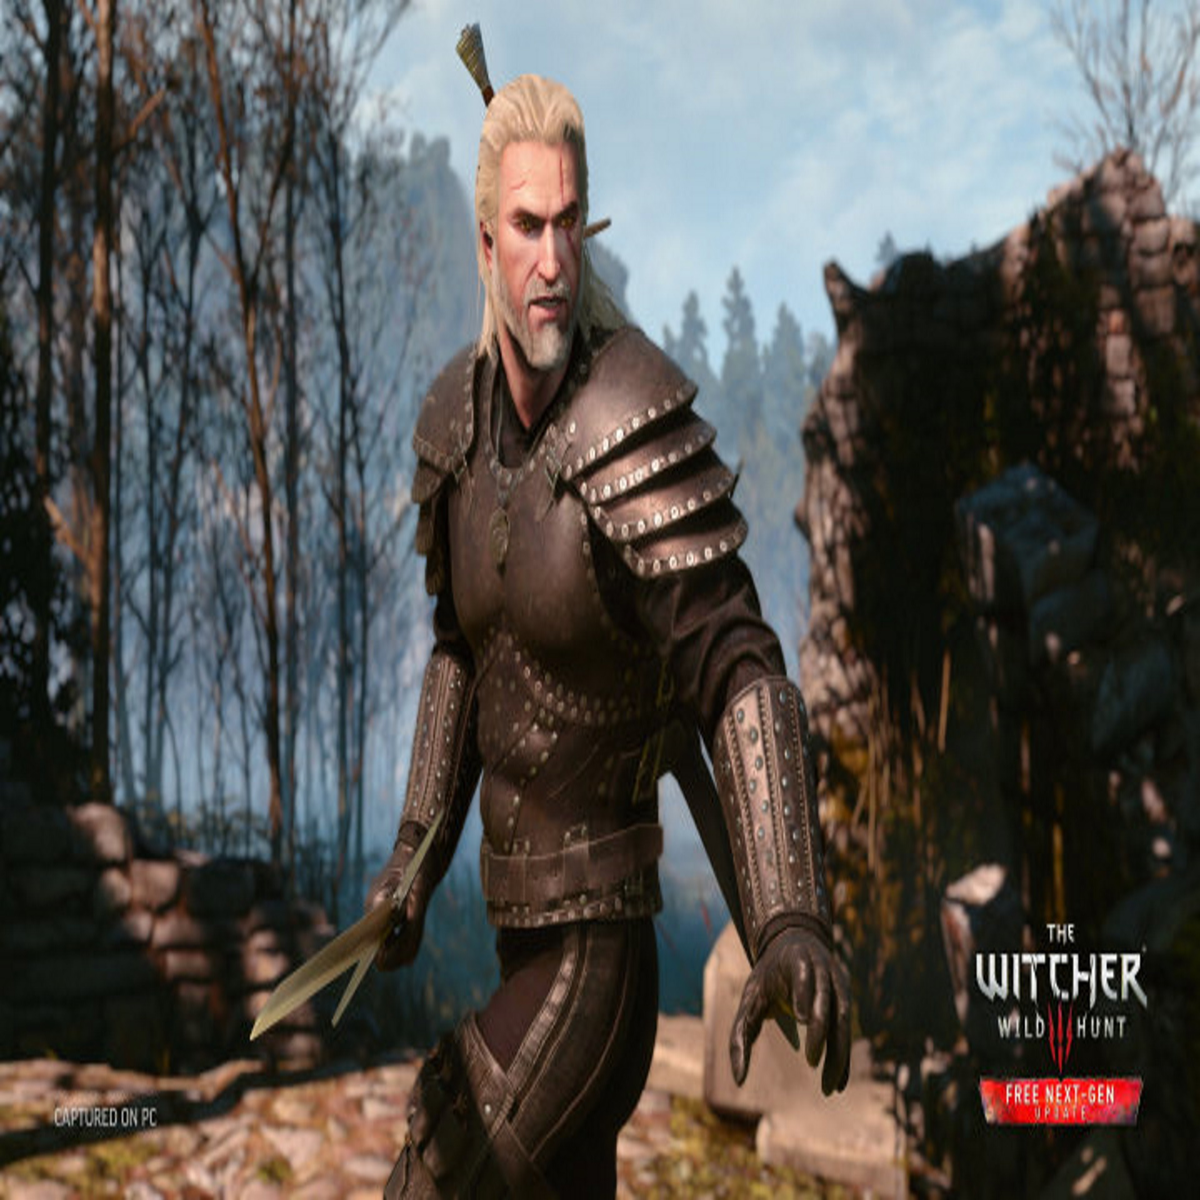 The Witcher 3 Complete Edition PS5 Review: A Brilliant Game Made Even Better